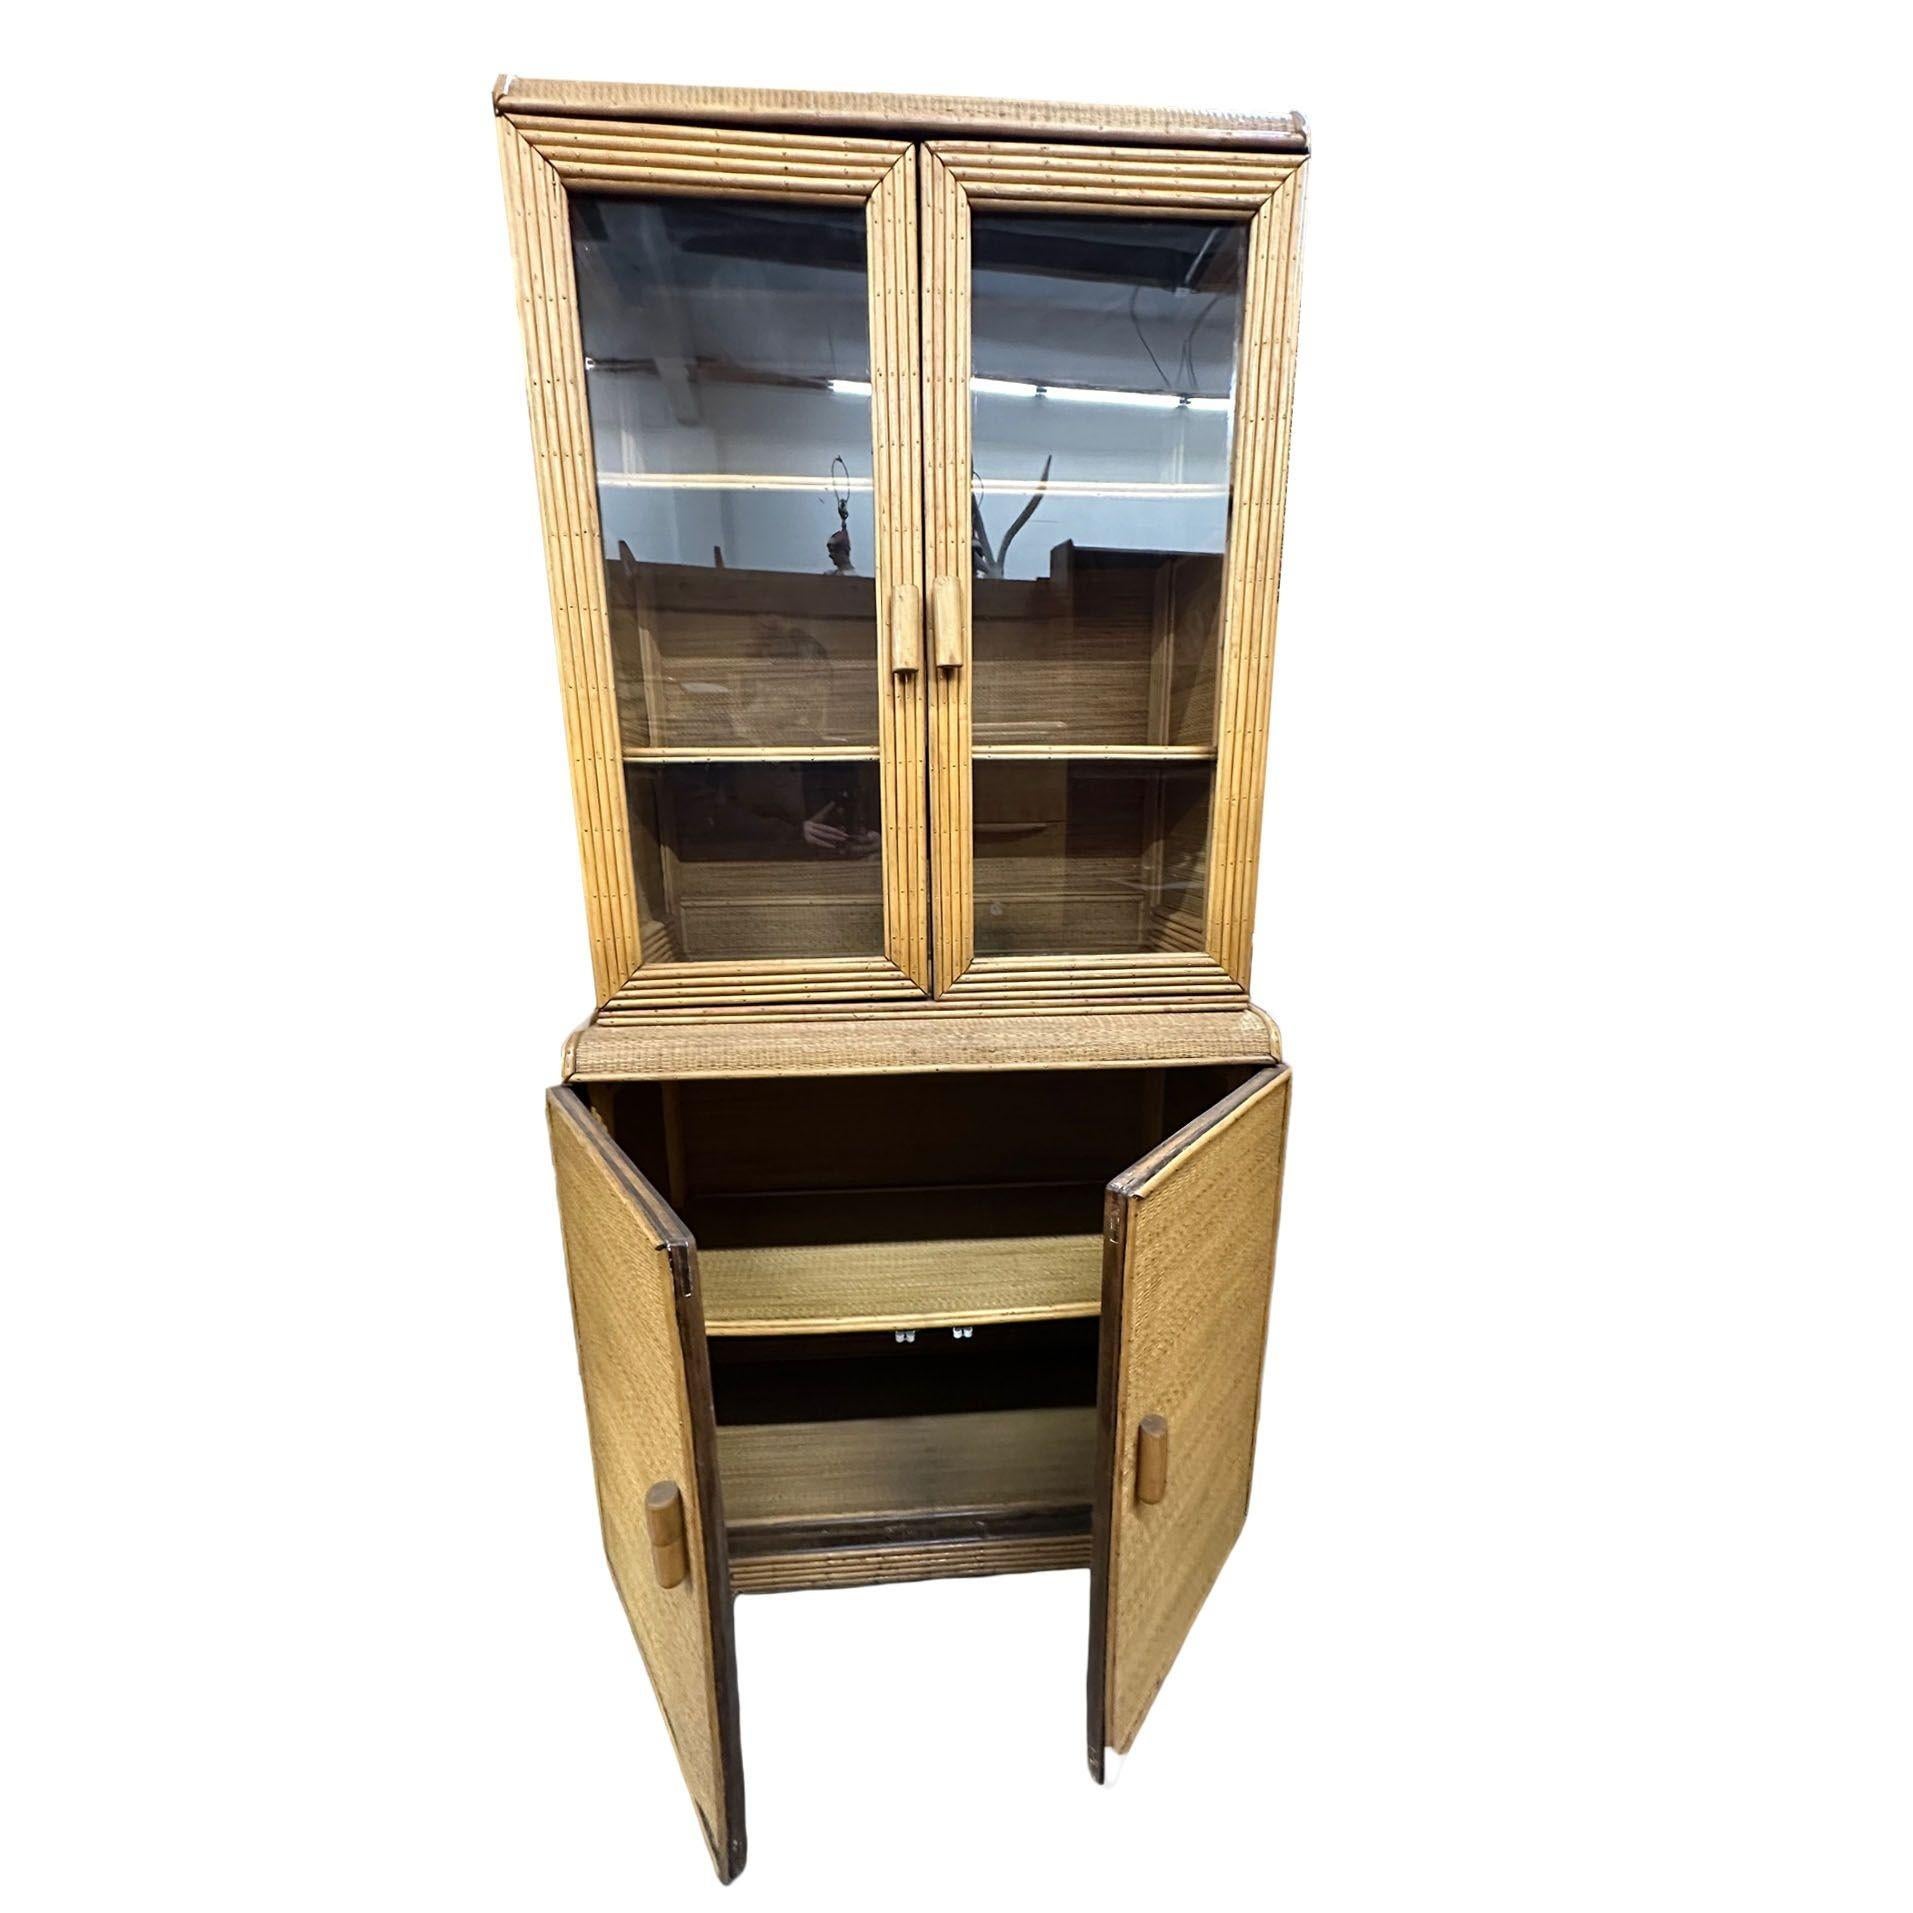 Restored Art Deco Stick Rattan & Grass Mat China Cabinet/Etagere In Excellent Condition For Sale In Van Nuys, CA